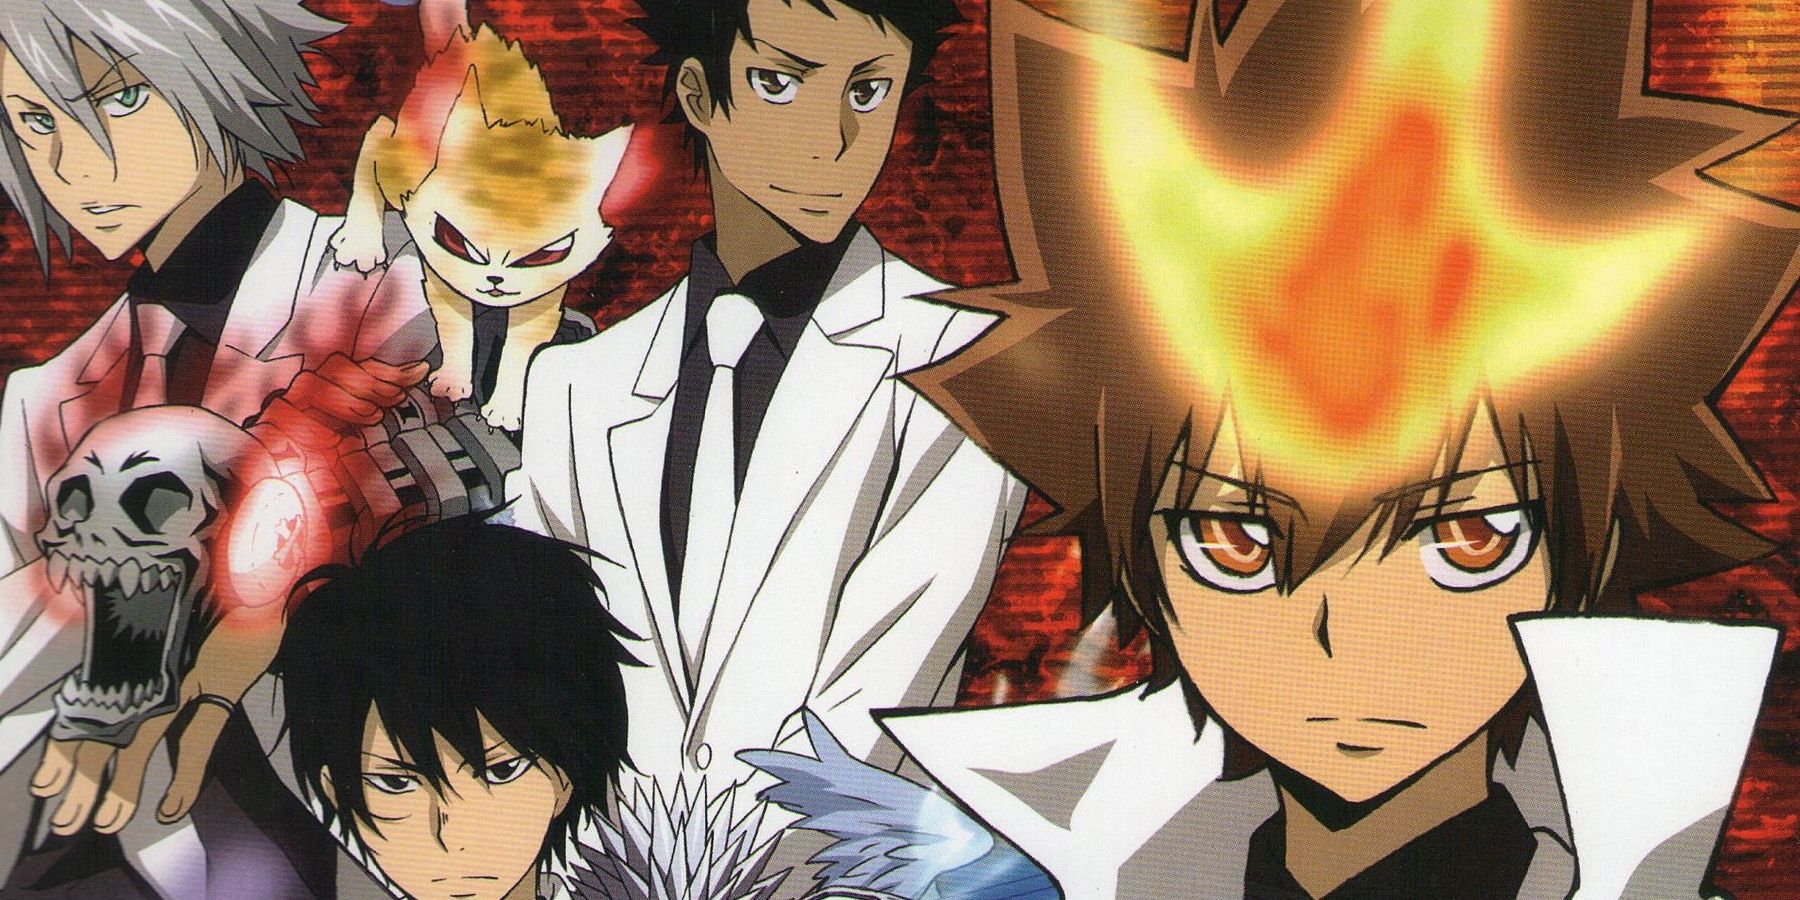 Petition  Some other animation company to take over Katekyo Hitman Reborn  Anime  Changeorg